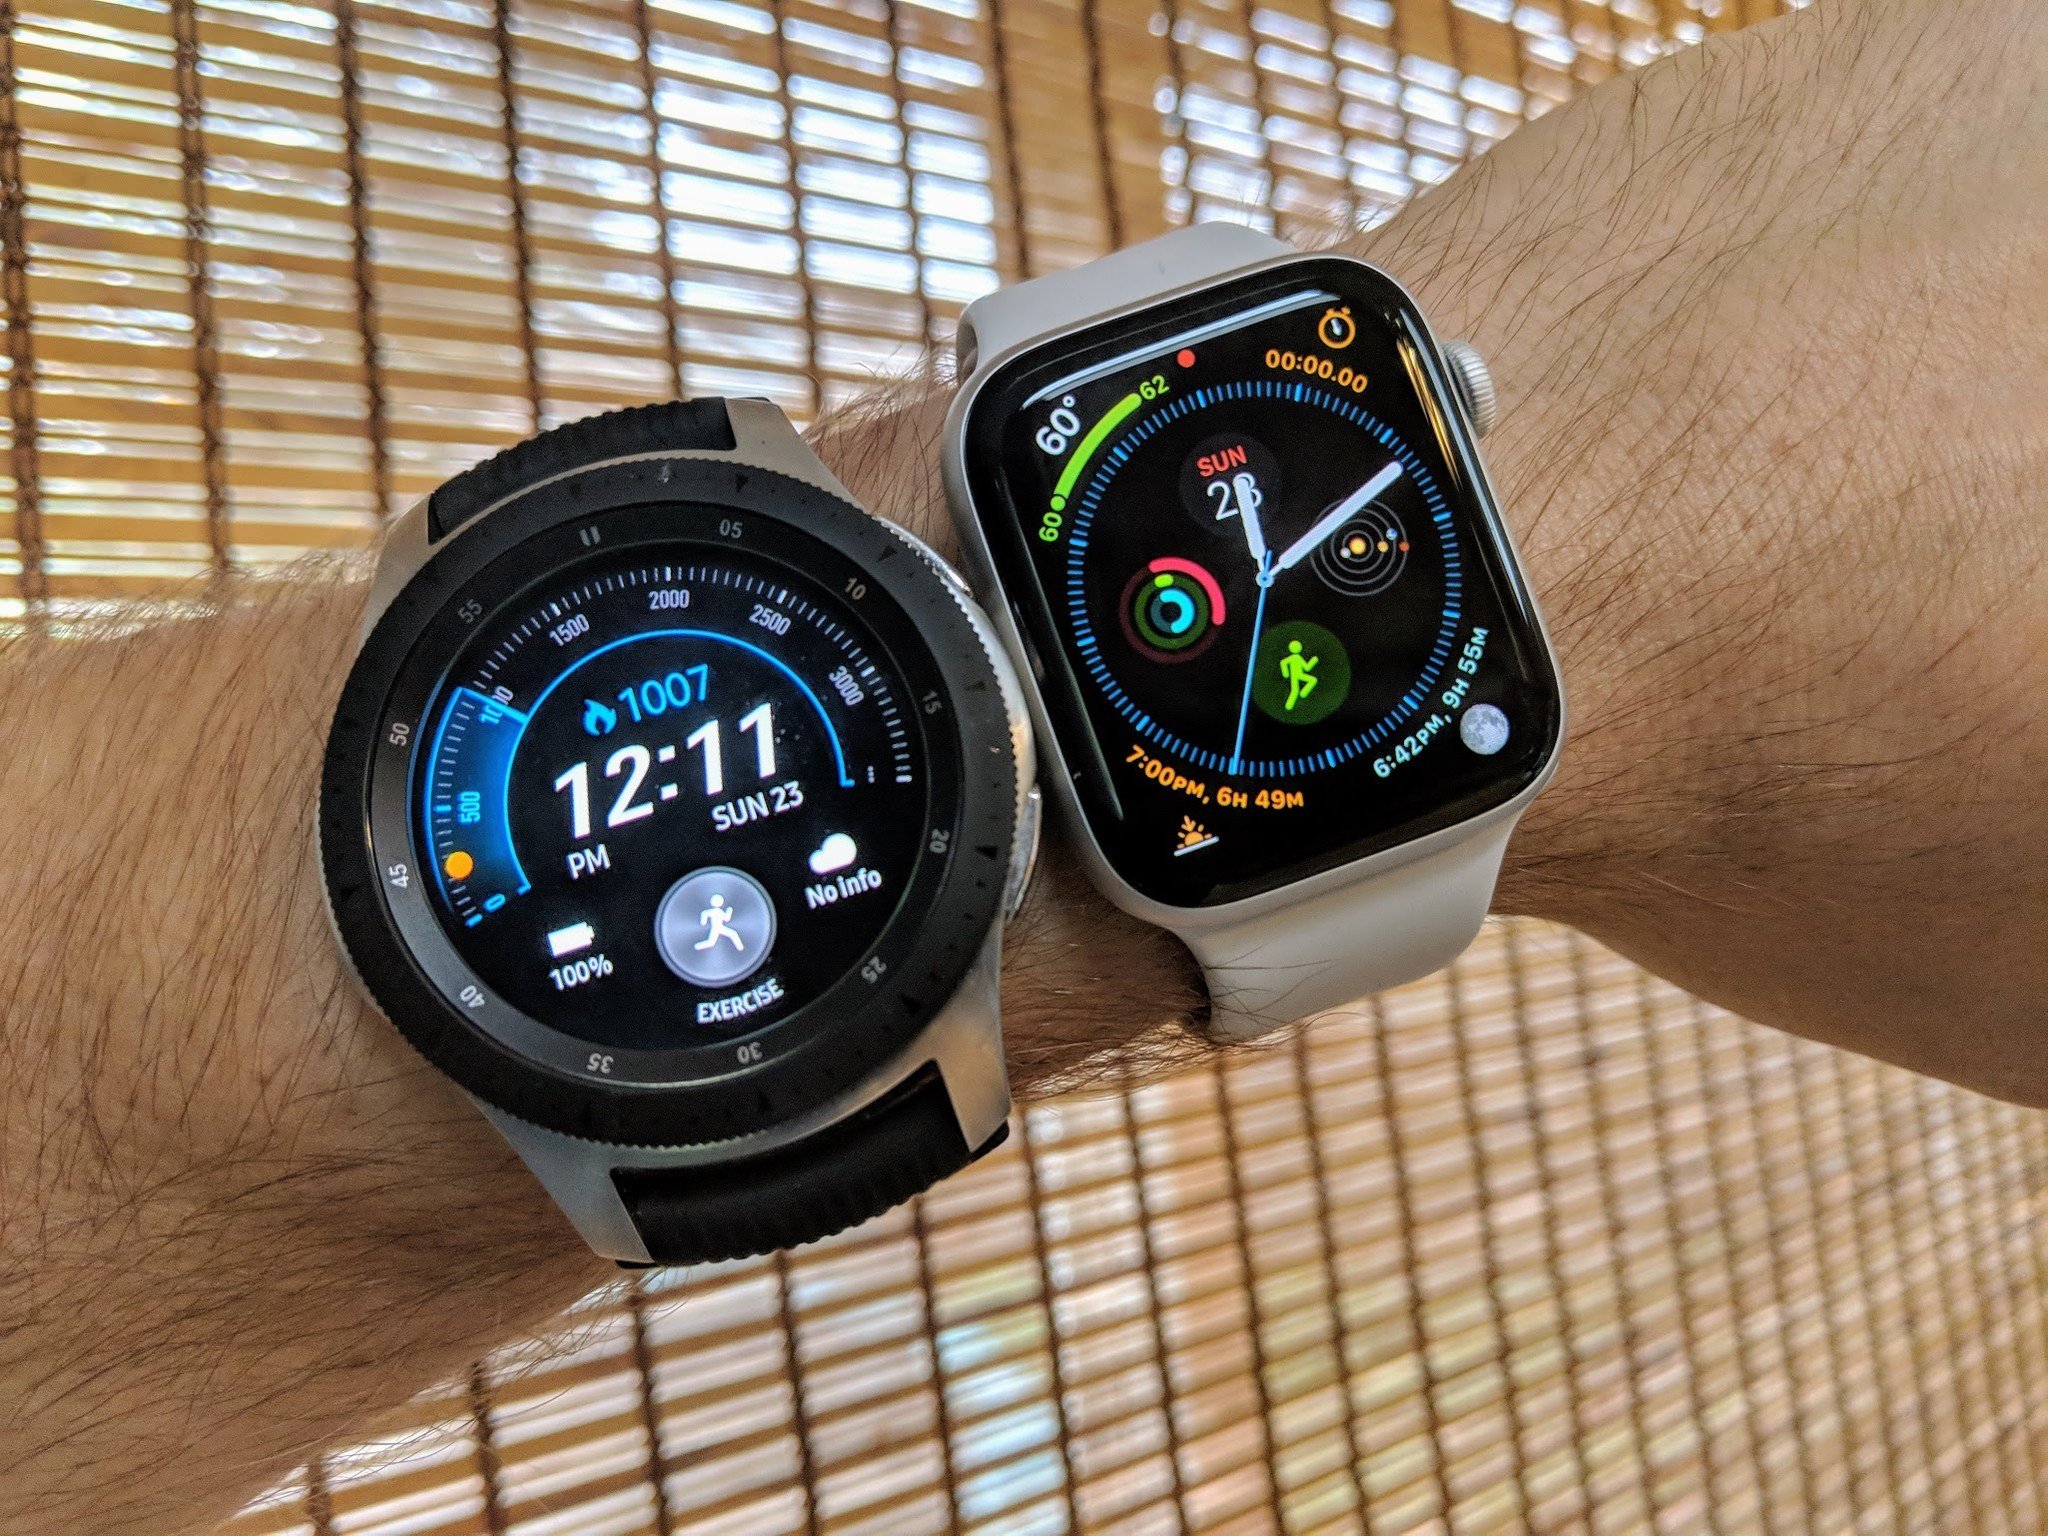 The Google Pixel Watch is not the magic bullet Wear OS has been waiting